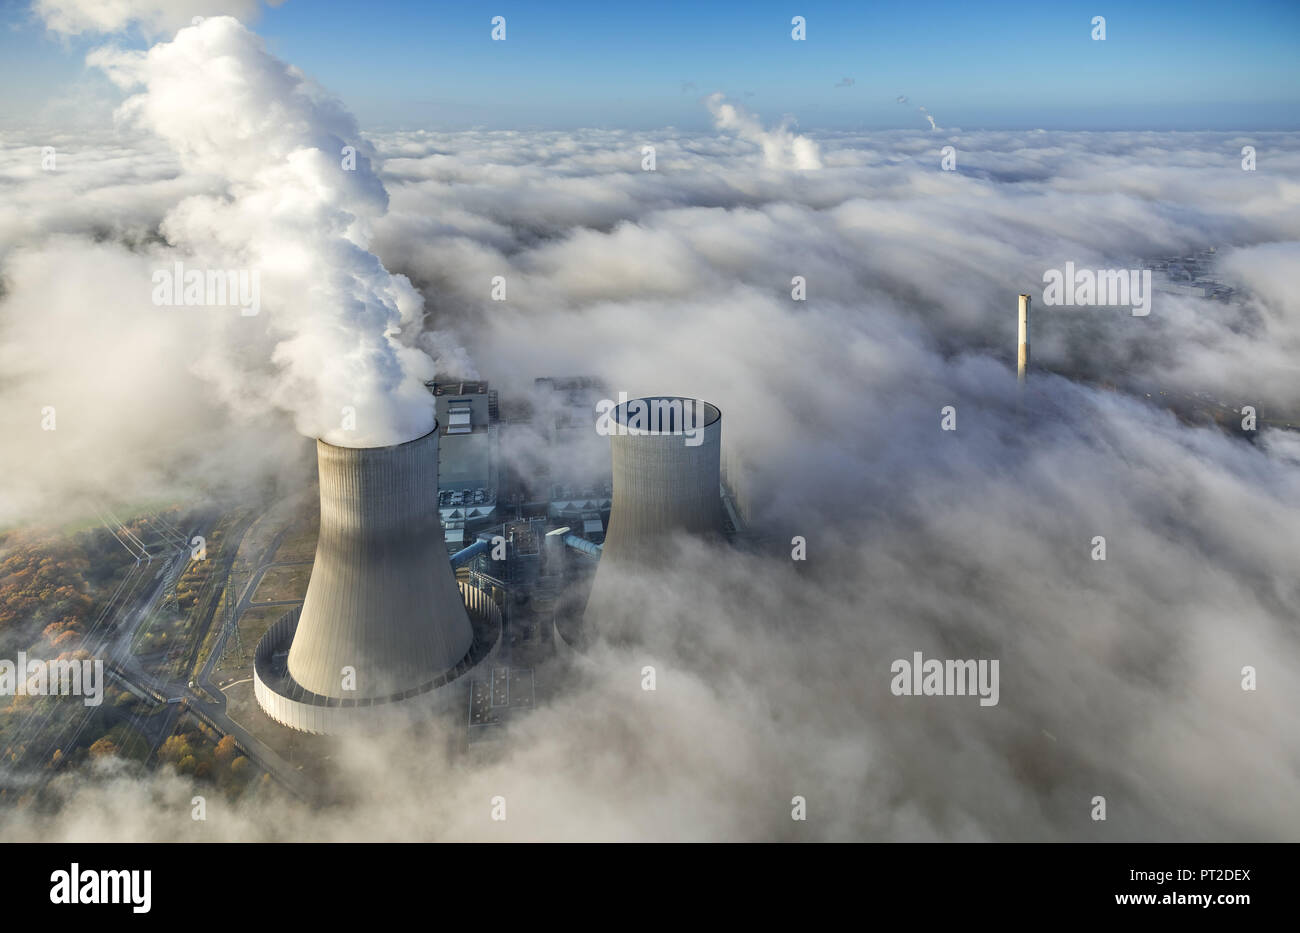 RWE Westfalen power plant, morning fog, clouds, the power plant emerging from the low cloud cover, Hamm, Ruhr area, North Rhine-Westphalia, Germany Stock Photo